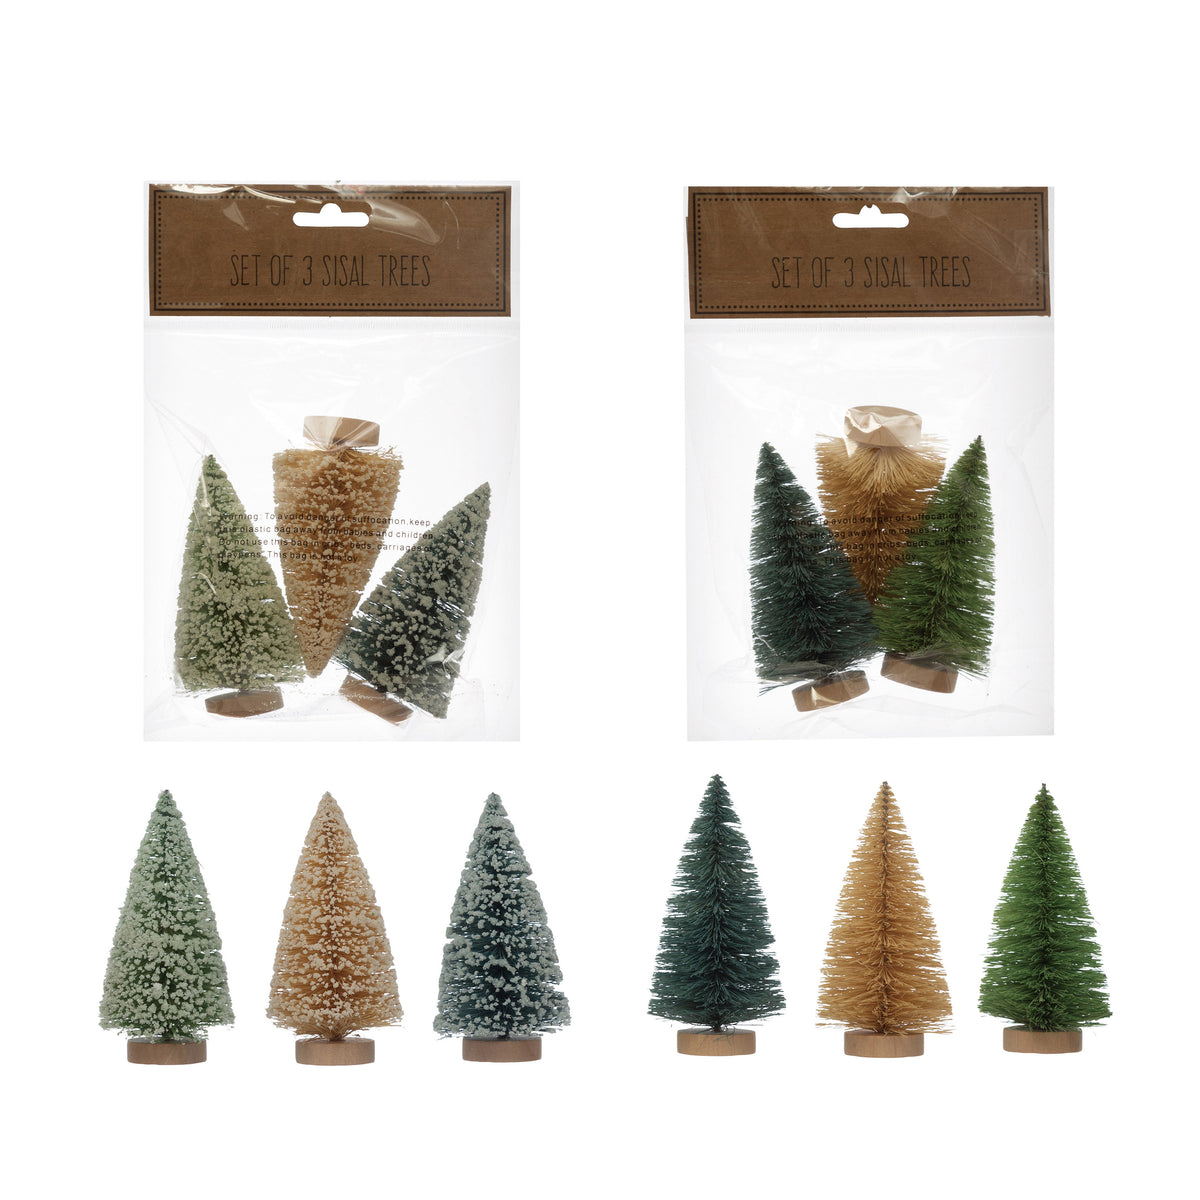 2&quot; Round x 4&quot;H Sisal Bottle Brush Trees in Bag, Multi Color, Set of 3, 2 Finishes